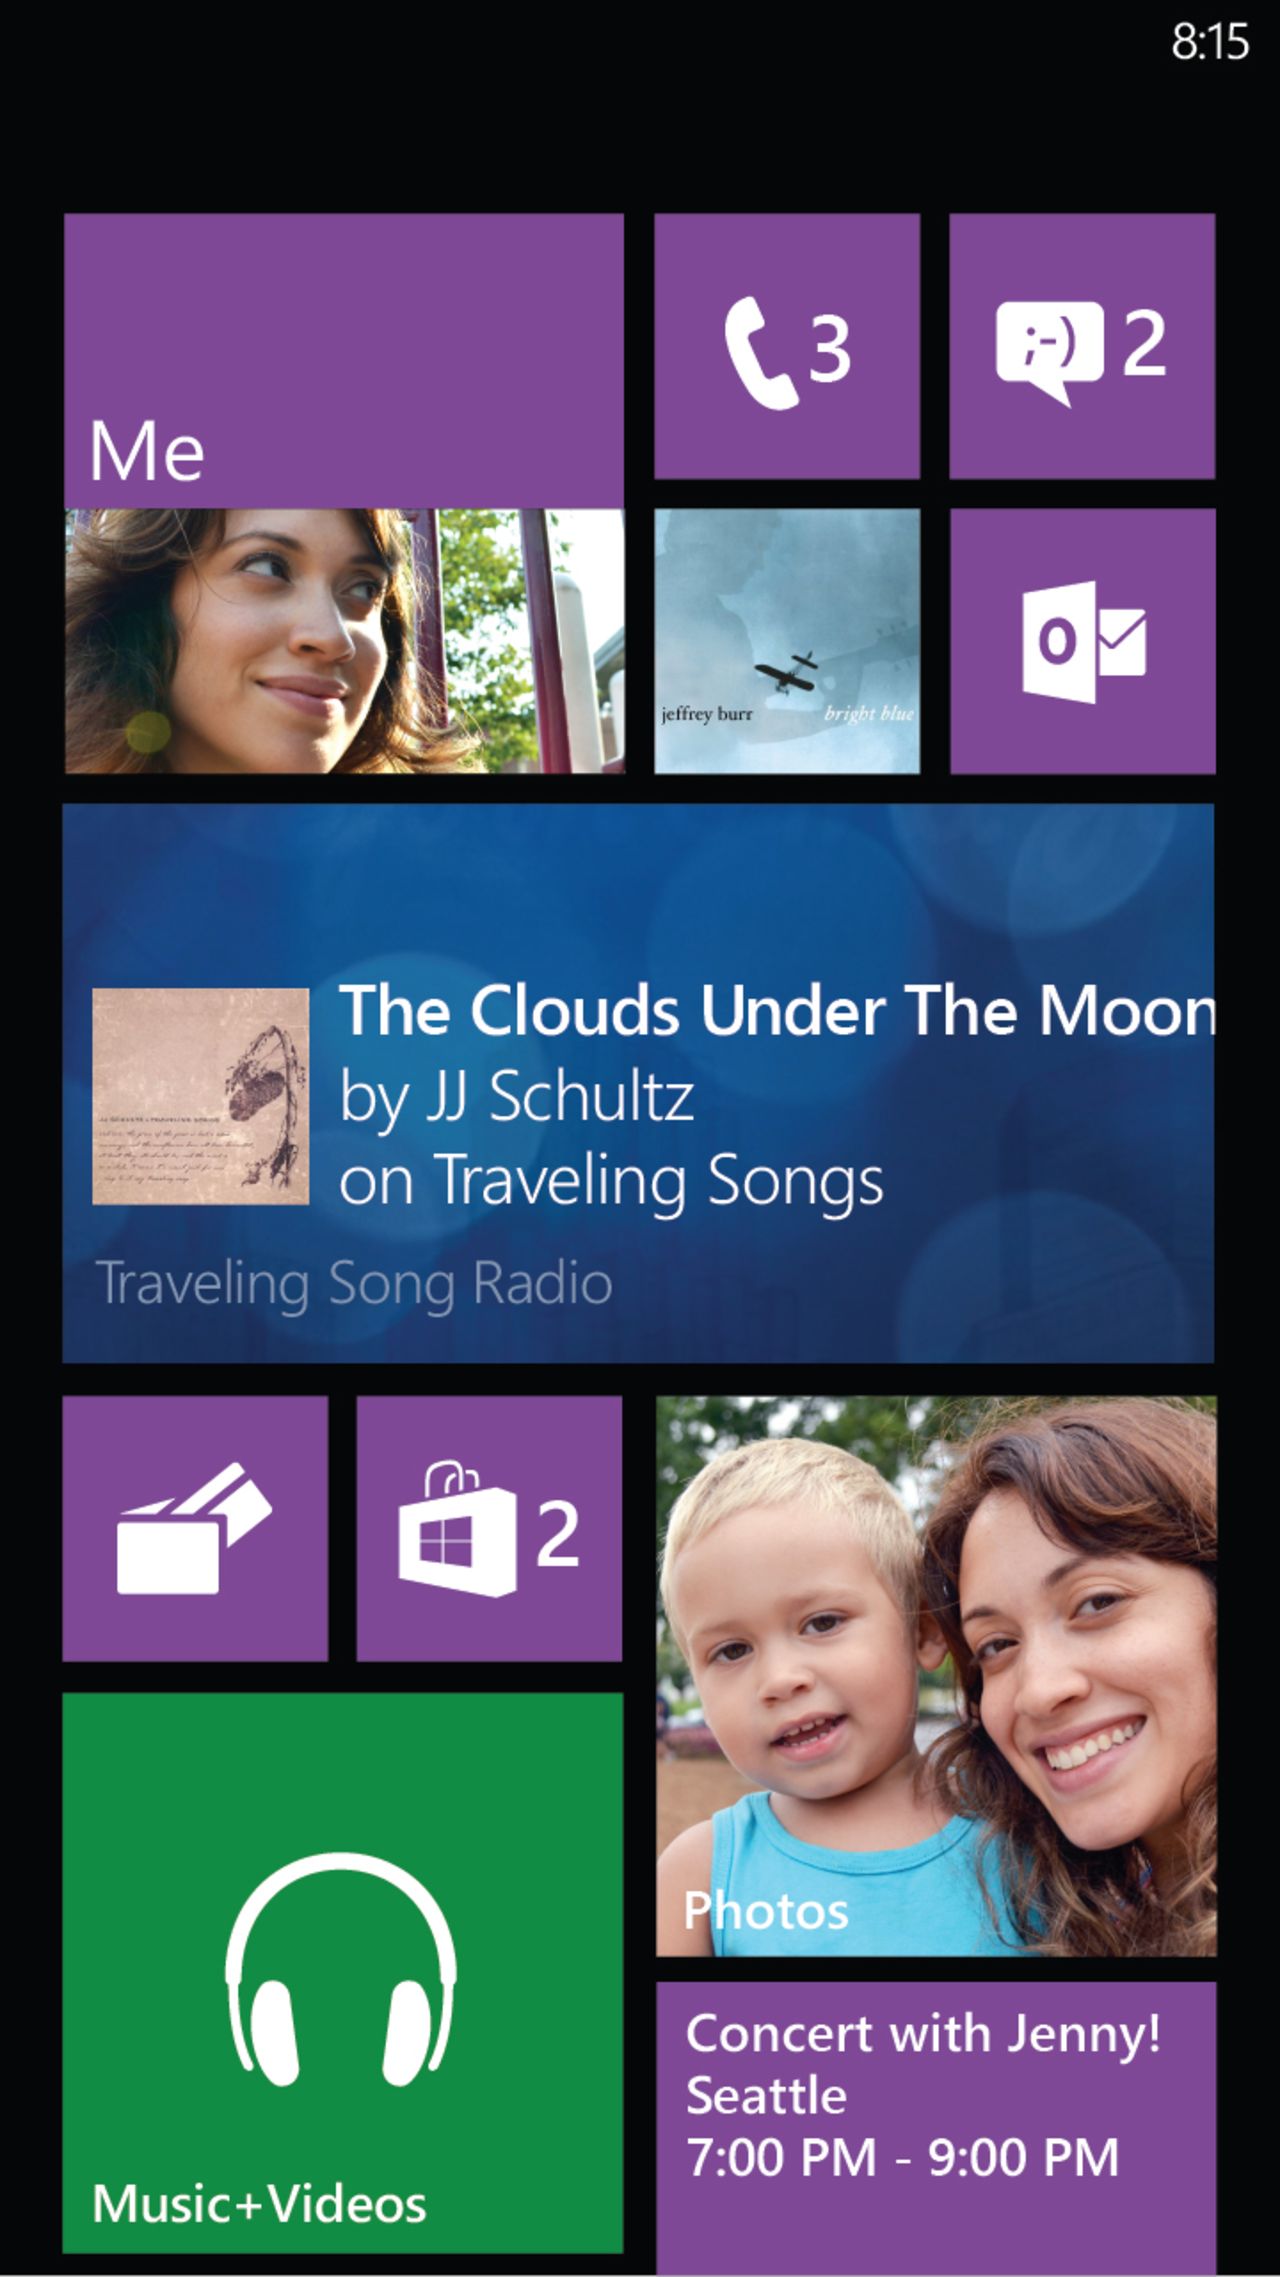 All smartphones allow notifications that pop up on your screen when you get a text, say, or a Facebook message. But what if the icons, or tiles, on your screen would display real-time updates, such as weather reports? "Live tiles" on Windows phones already do.